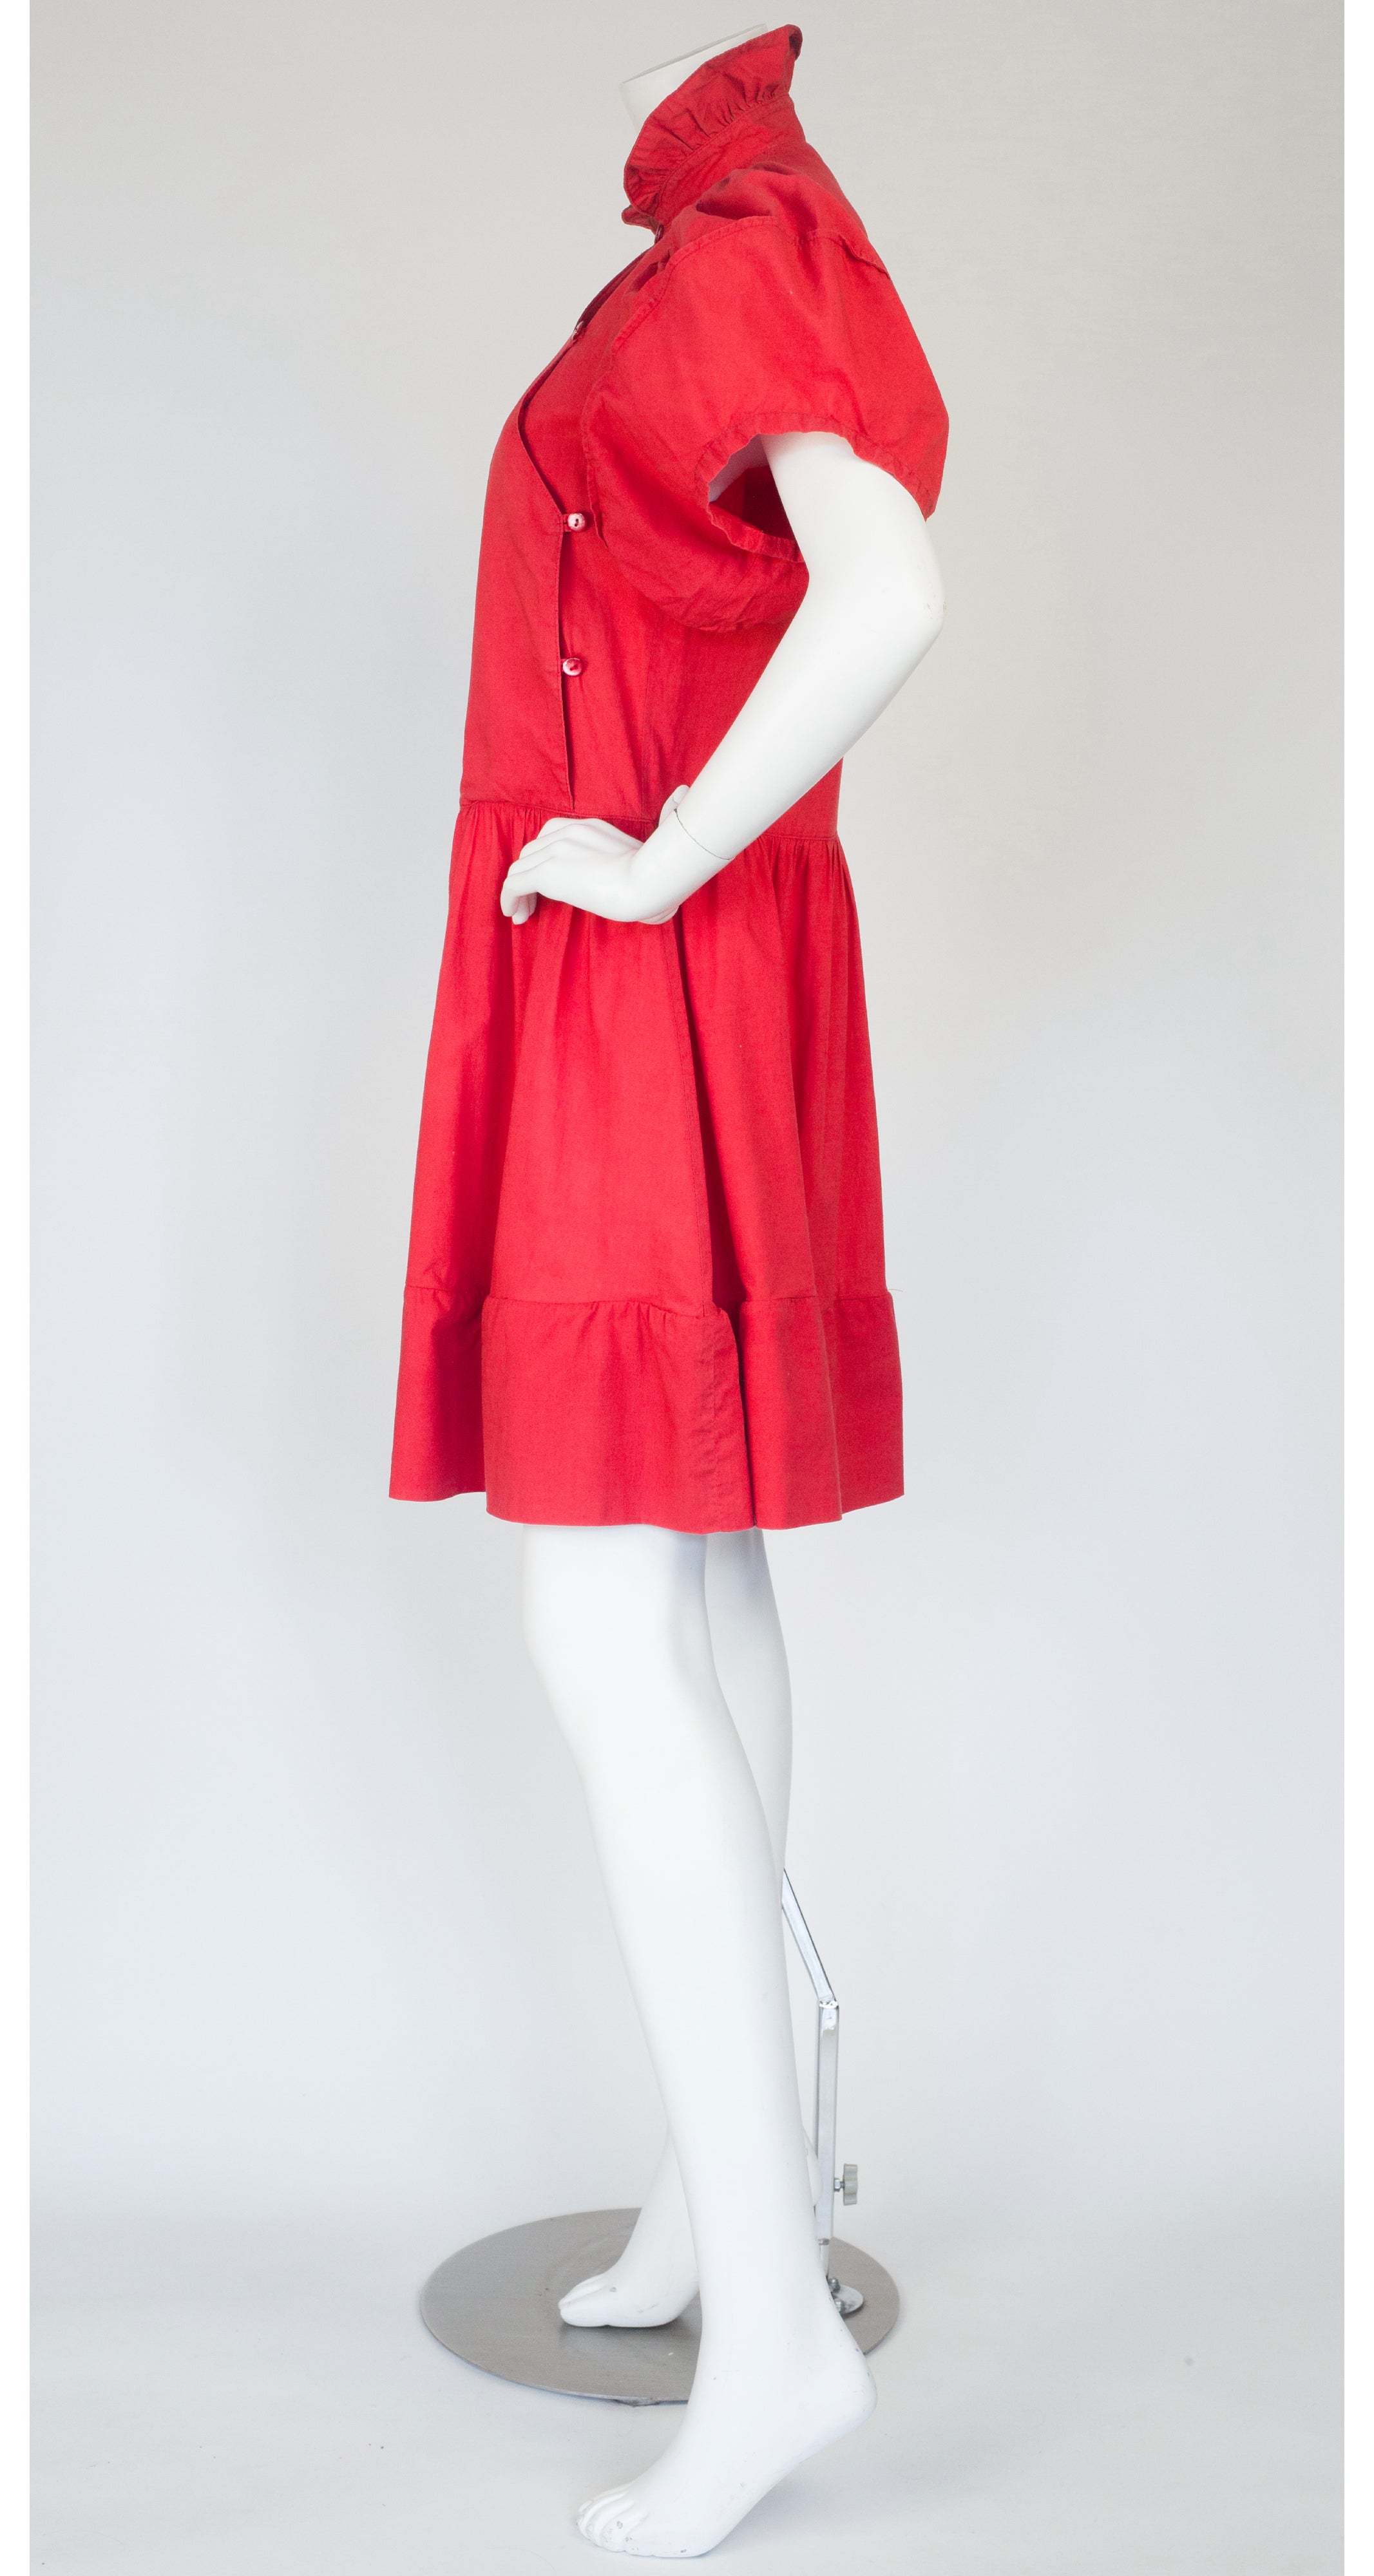 1981 Documented Red Cotton Puff Sleeve Dress